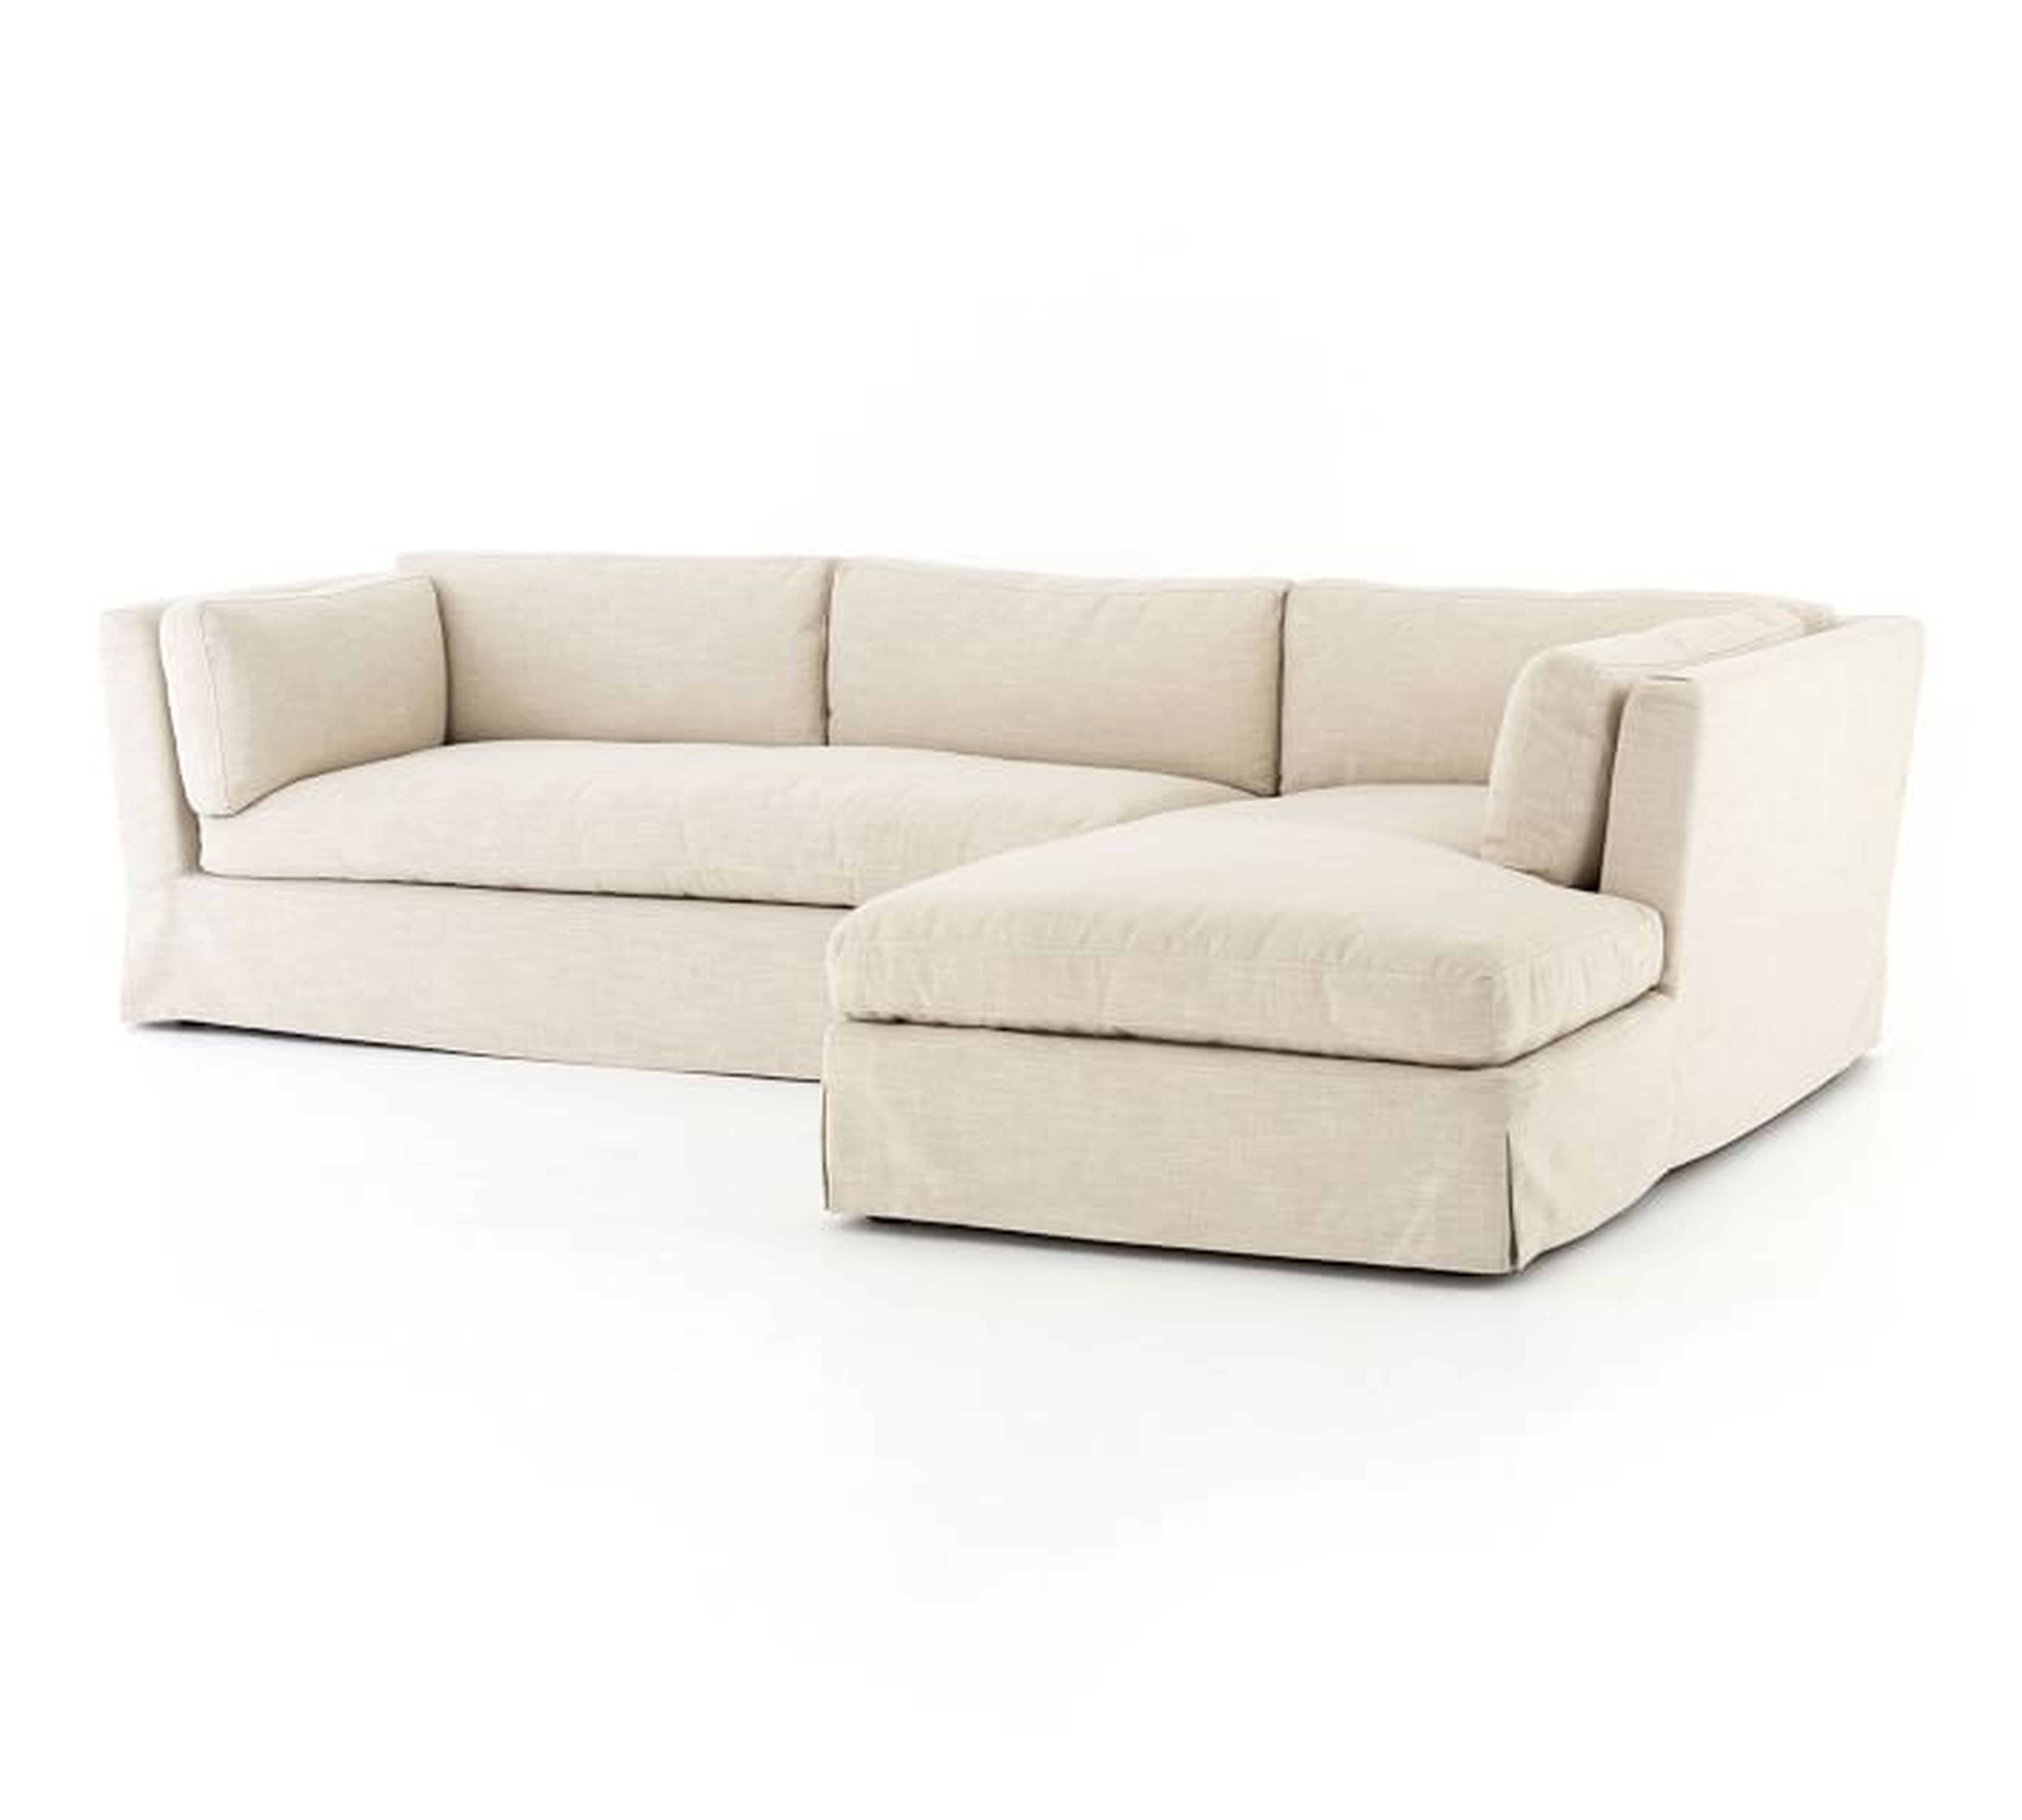 Dawn Slipcovered Left Arm Sofa with Right Chaise Sectional - Pottery Barn